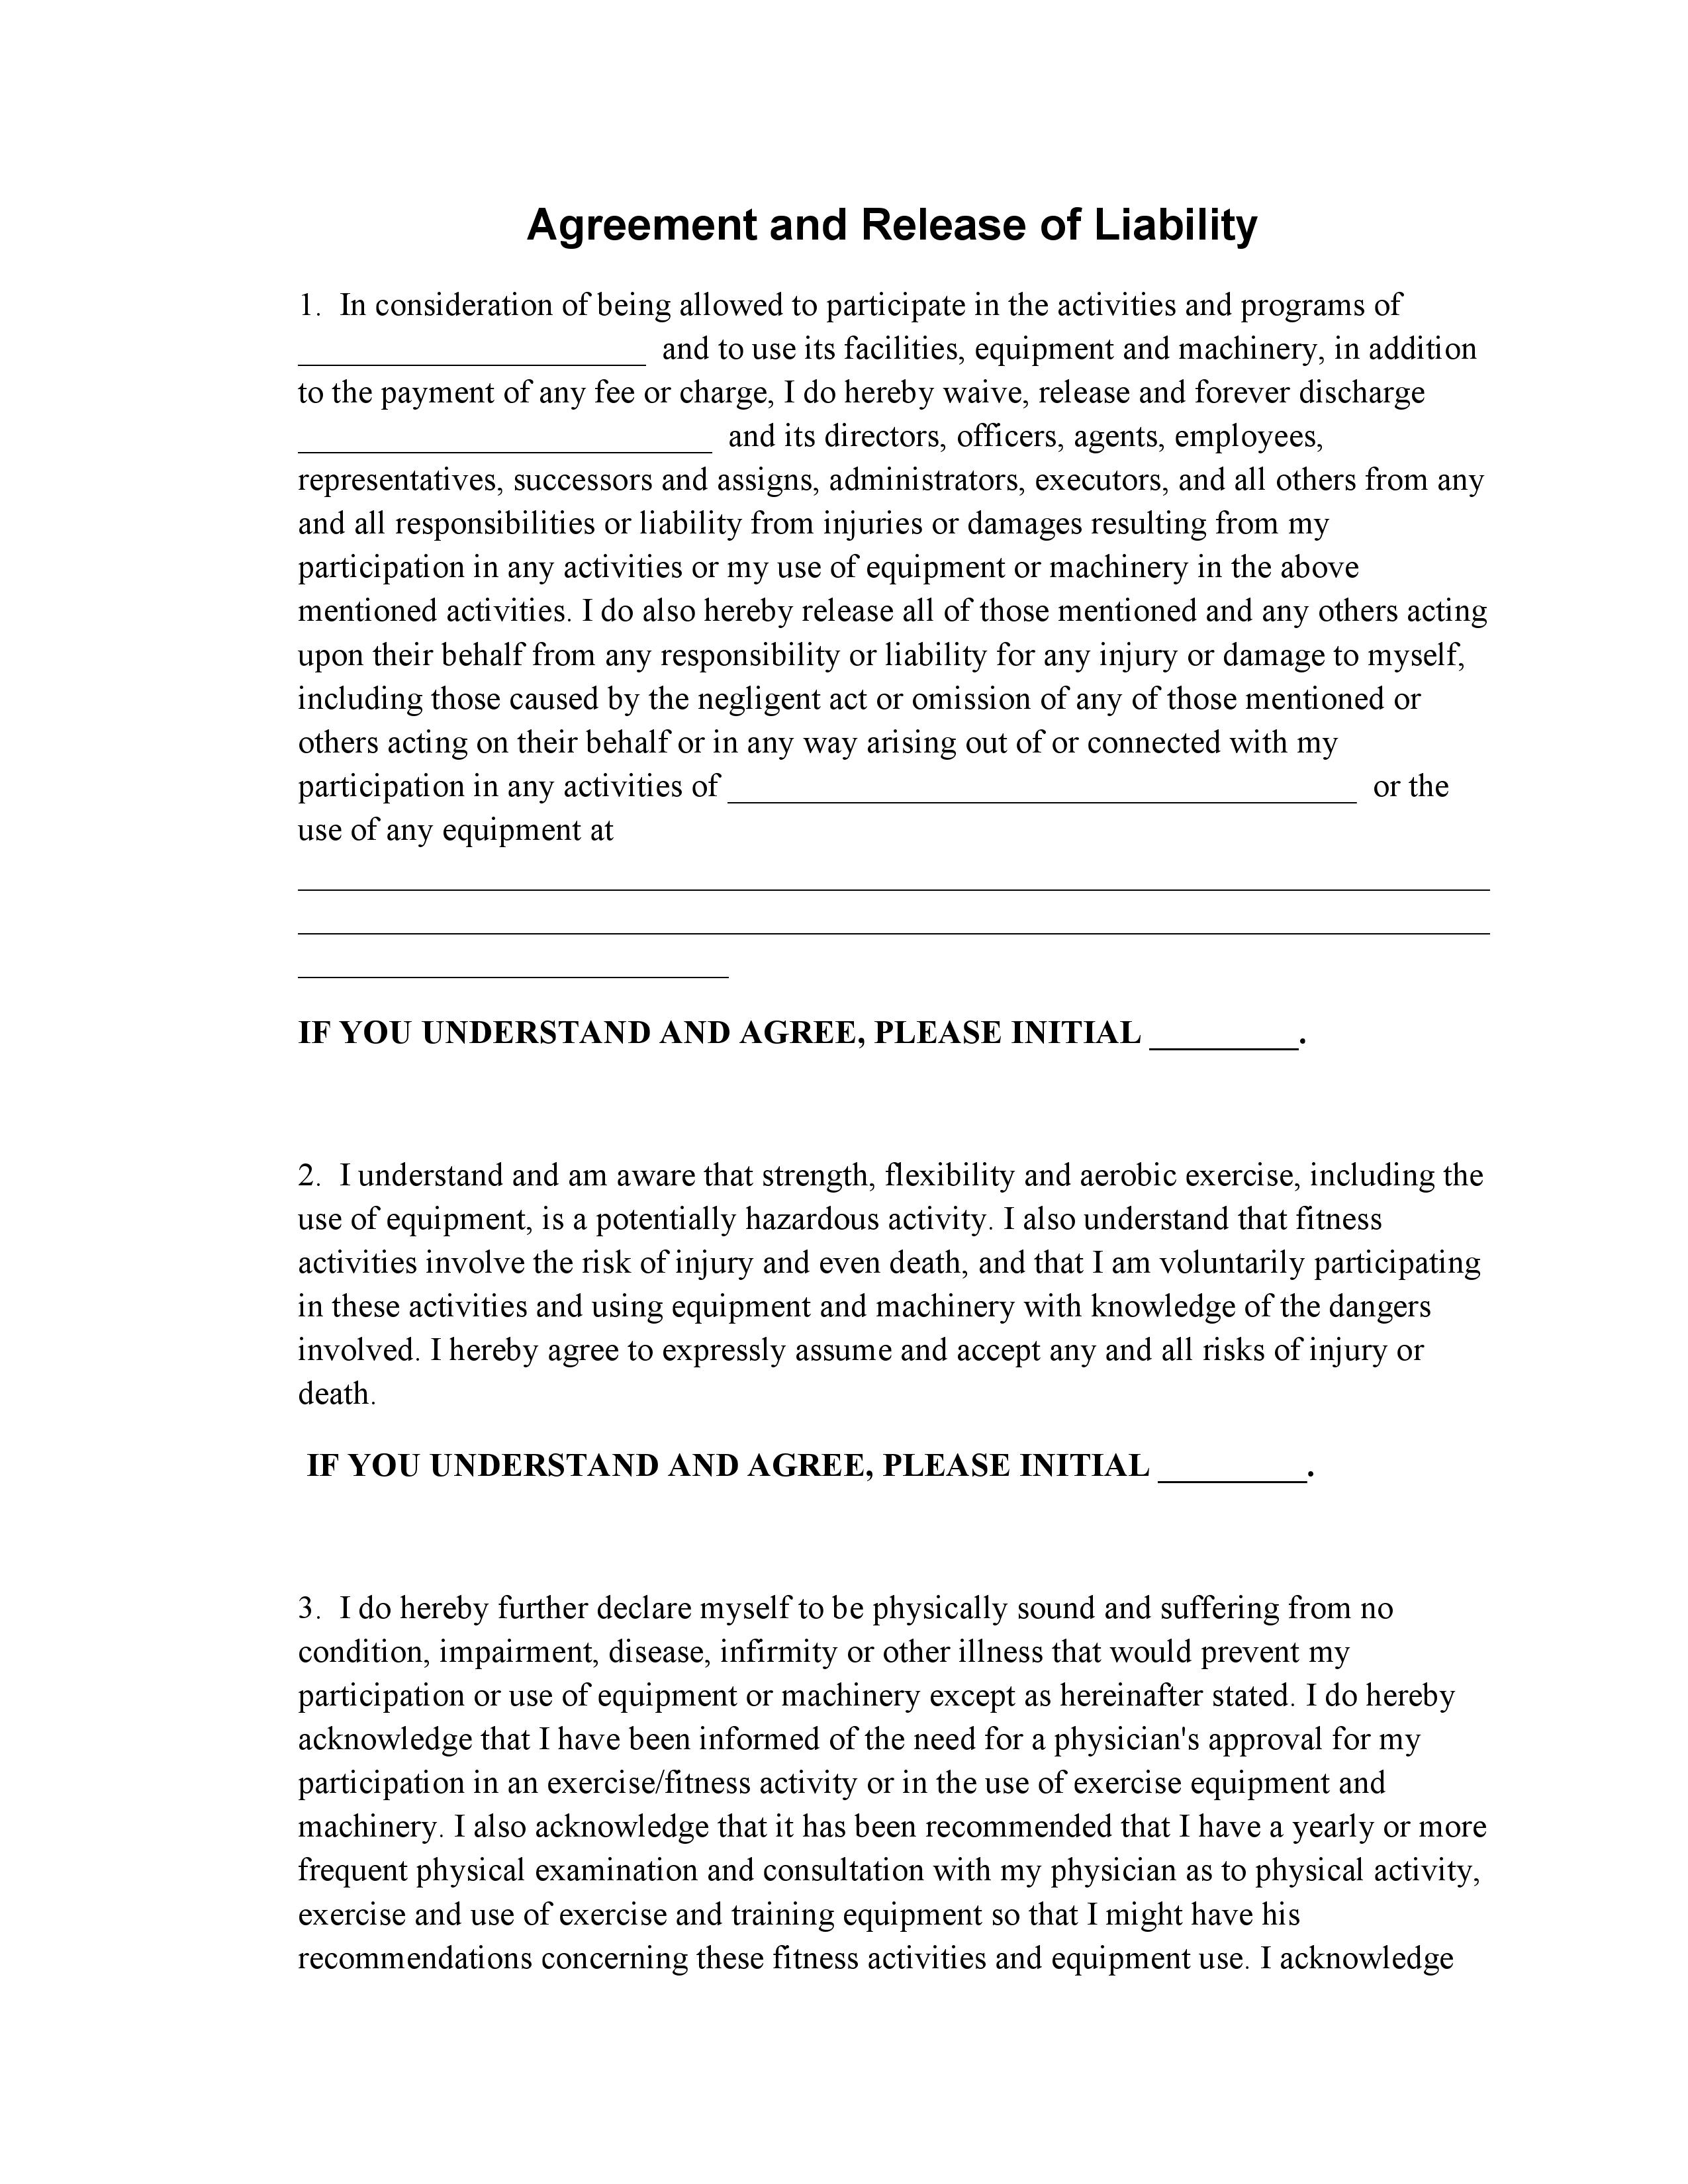 Printable exercise release form in pdf or word format.